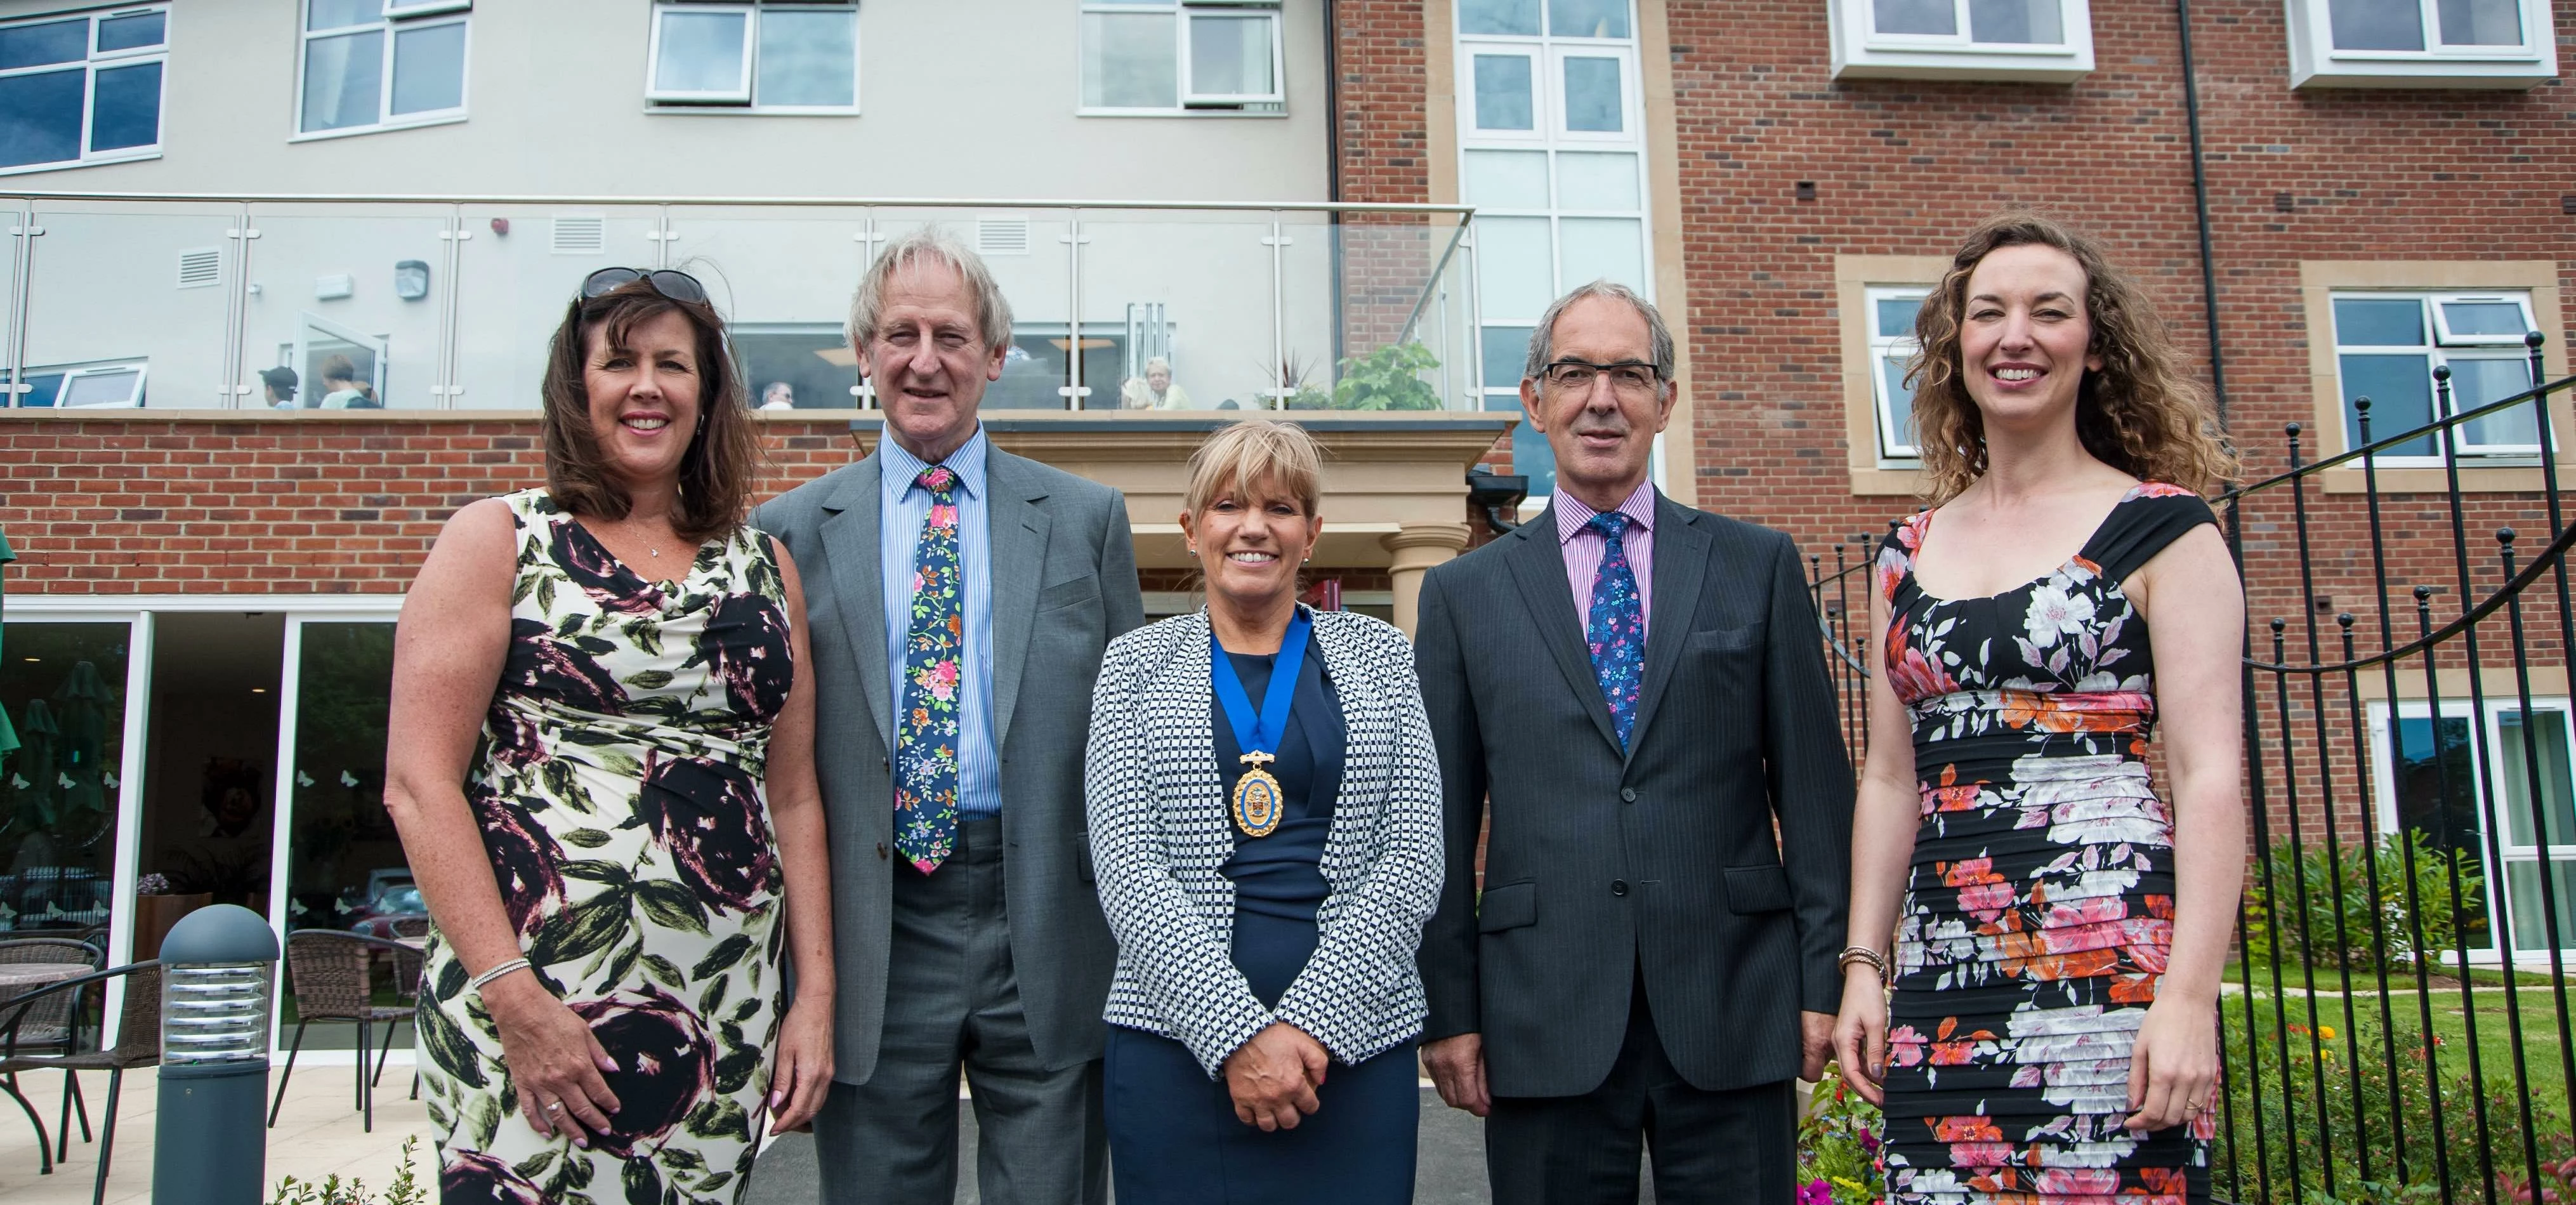 Eothen chief executive Jenny Hearl, Lord Curry, Cllr Cath Davis, Eothen’s chairman Dr Andrew Shepher